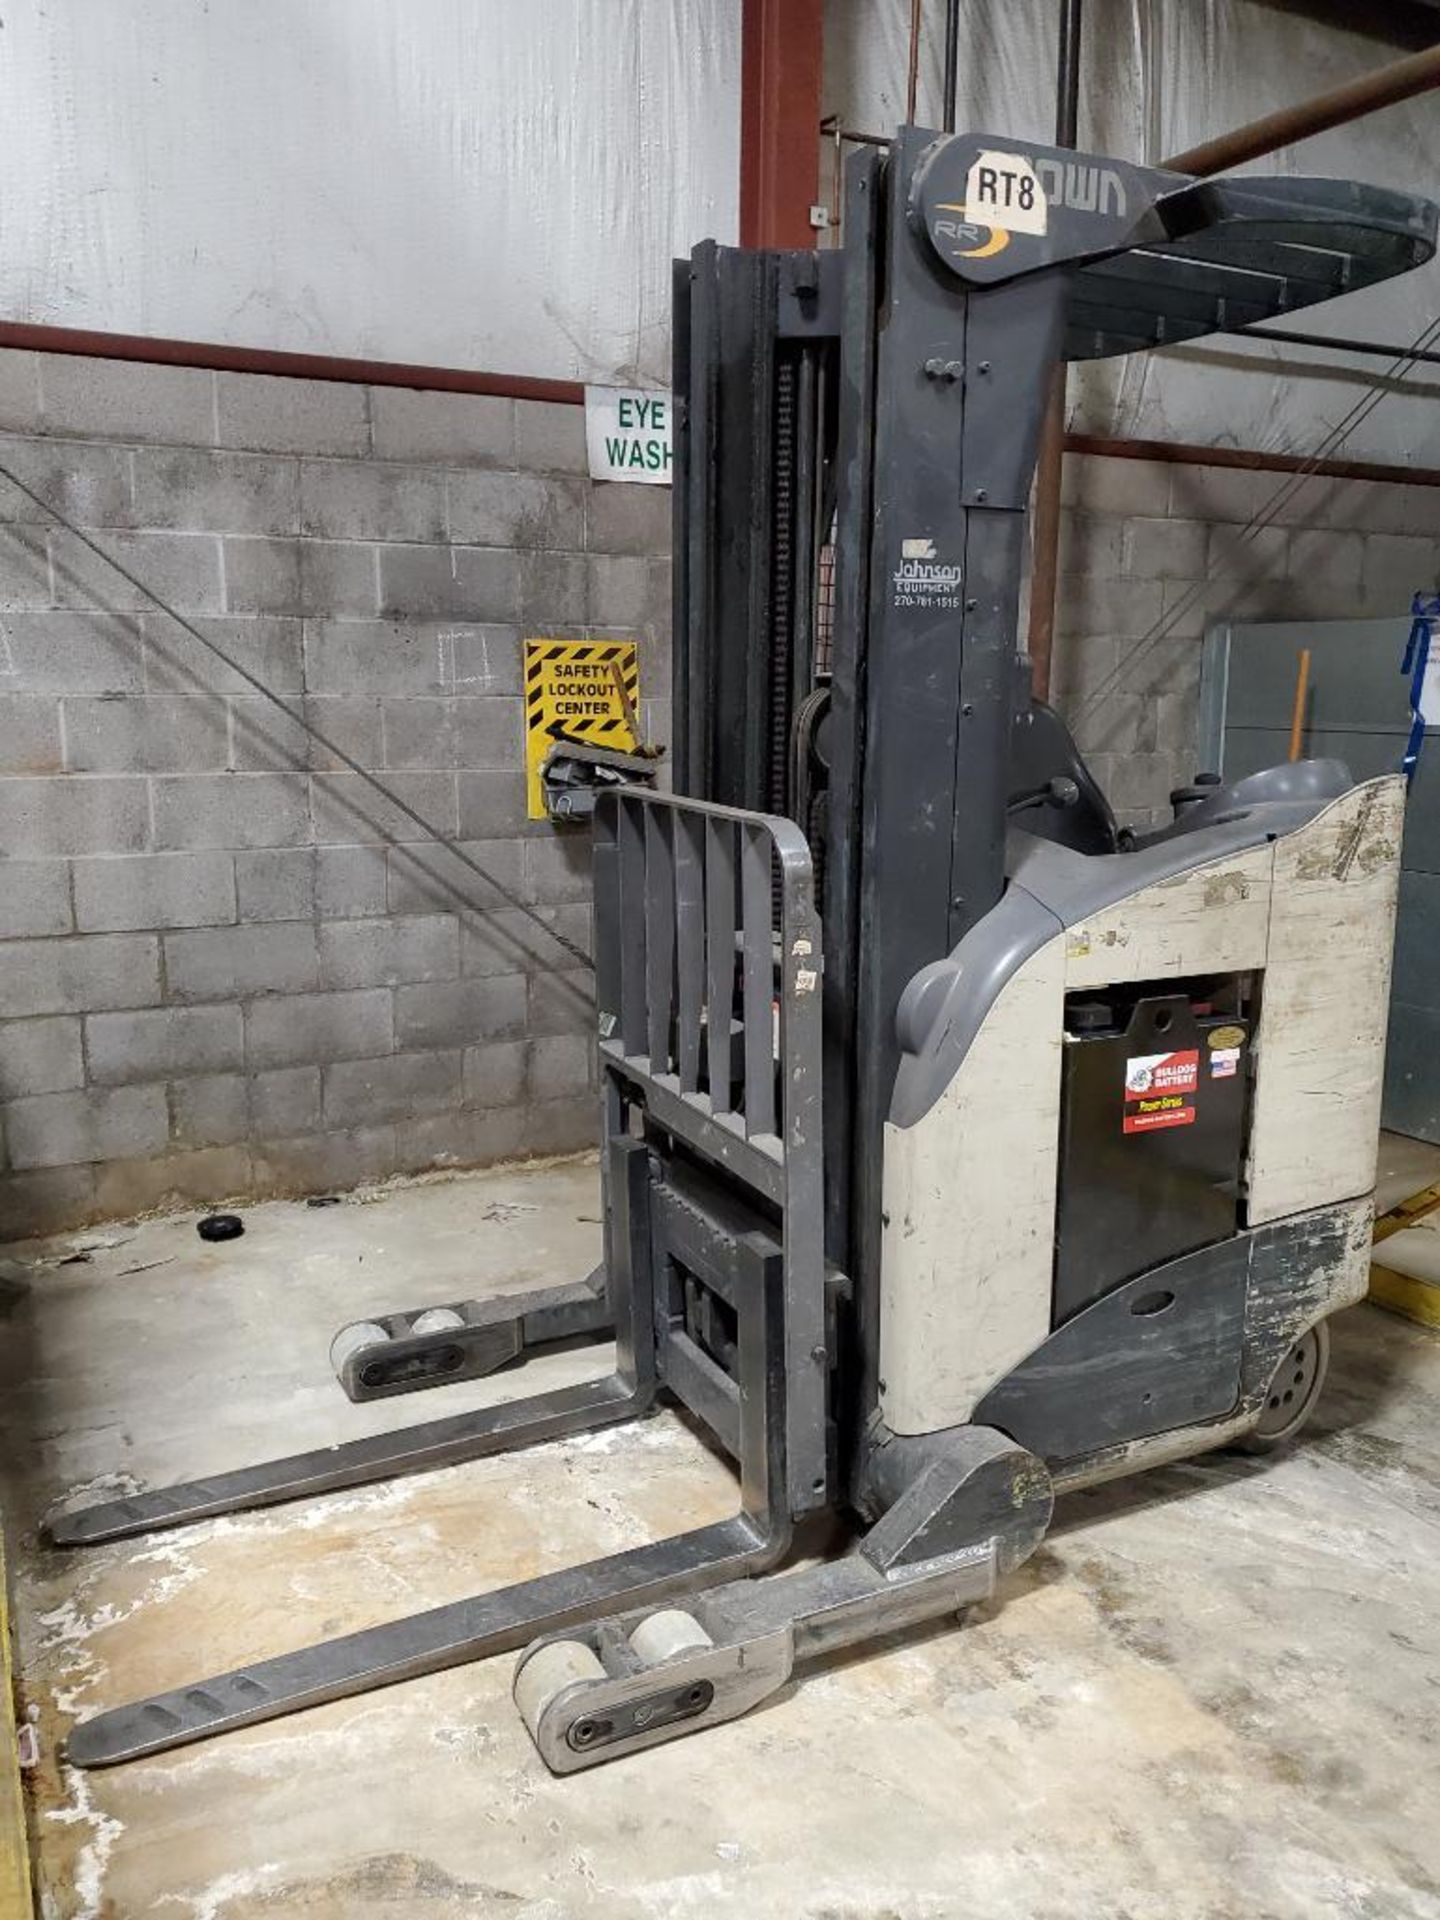 2006 Crown 5200 Series Electric Reach Truck, Model RR5220-35, S/N 1A301759, 36V, 3,500 Lb. Capacity, - Image 2 of 11